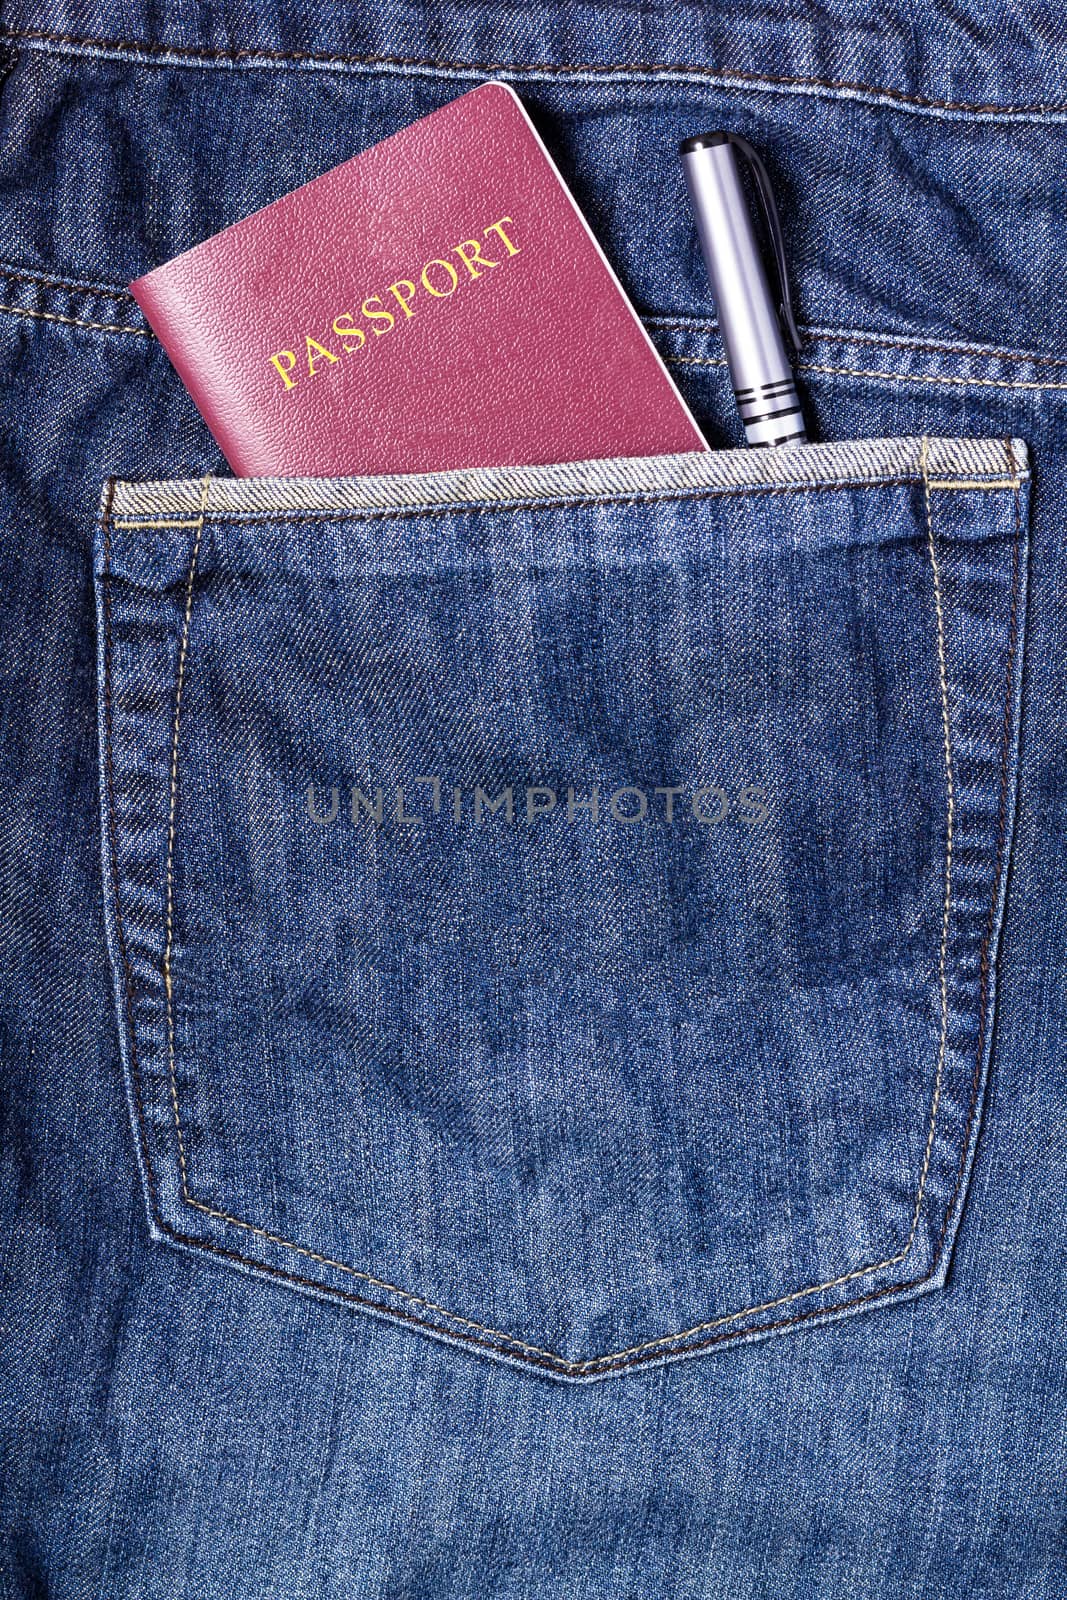 Passport and pen in blue jean pocket, traveling concept, tourism concept